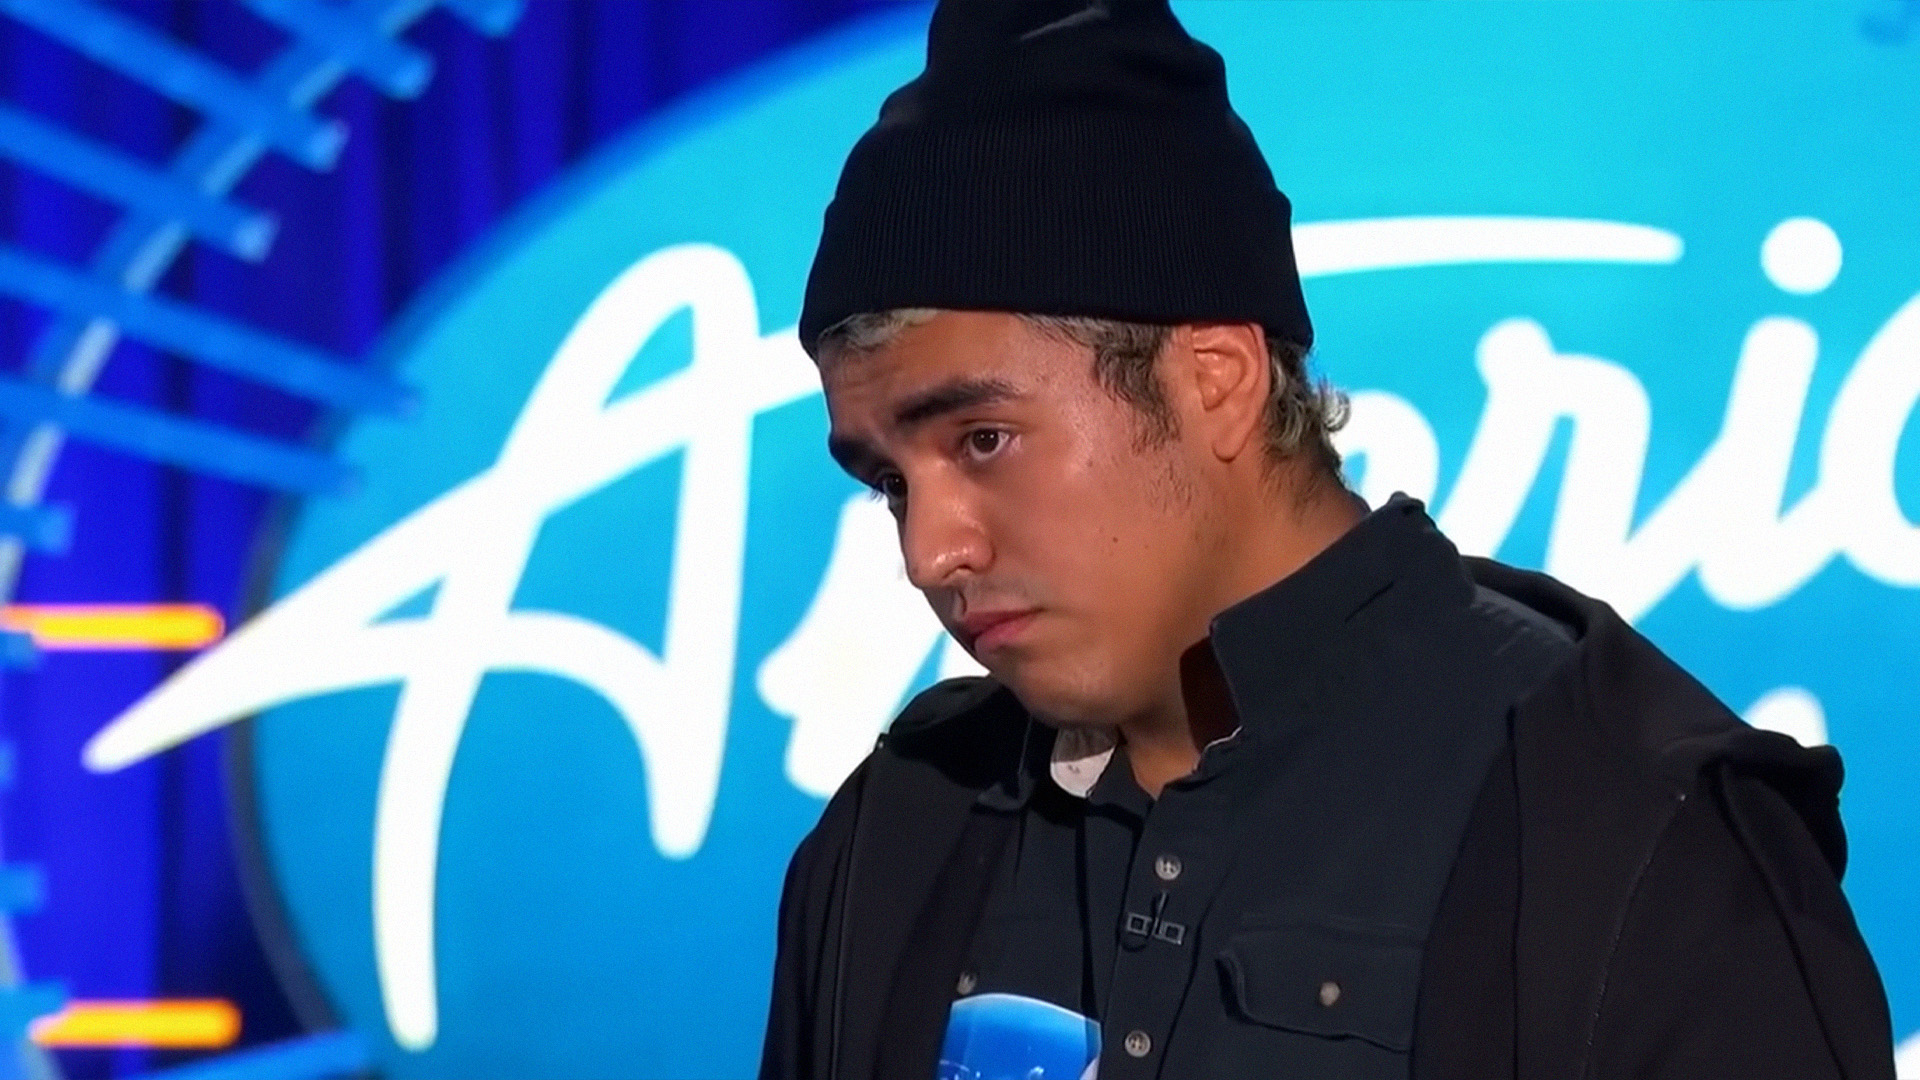 American Idol's Most Unforgettable Audition: Where is Alejandro Aranda Now?